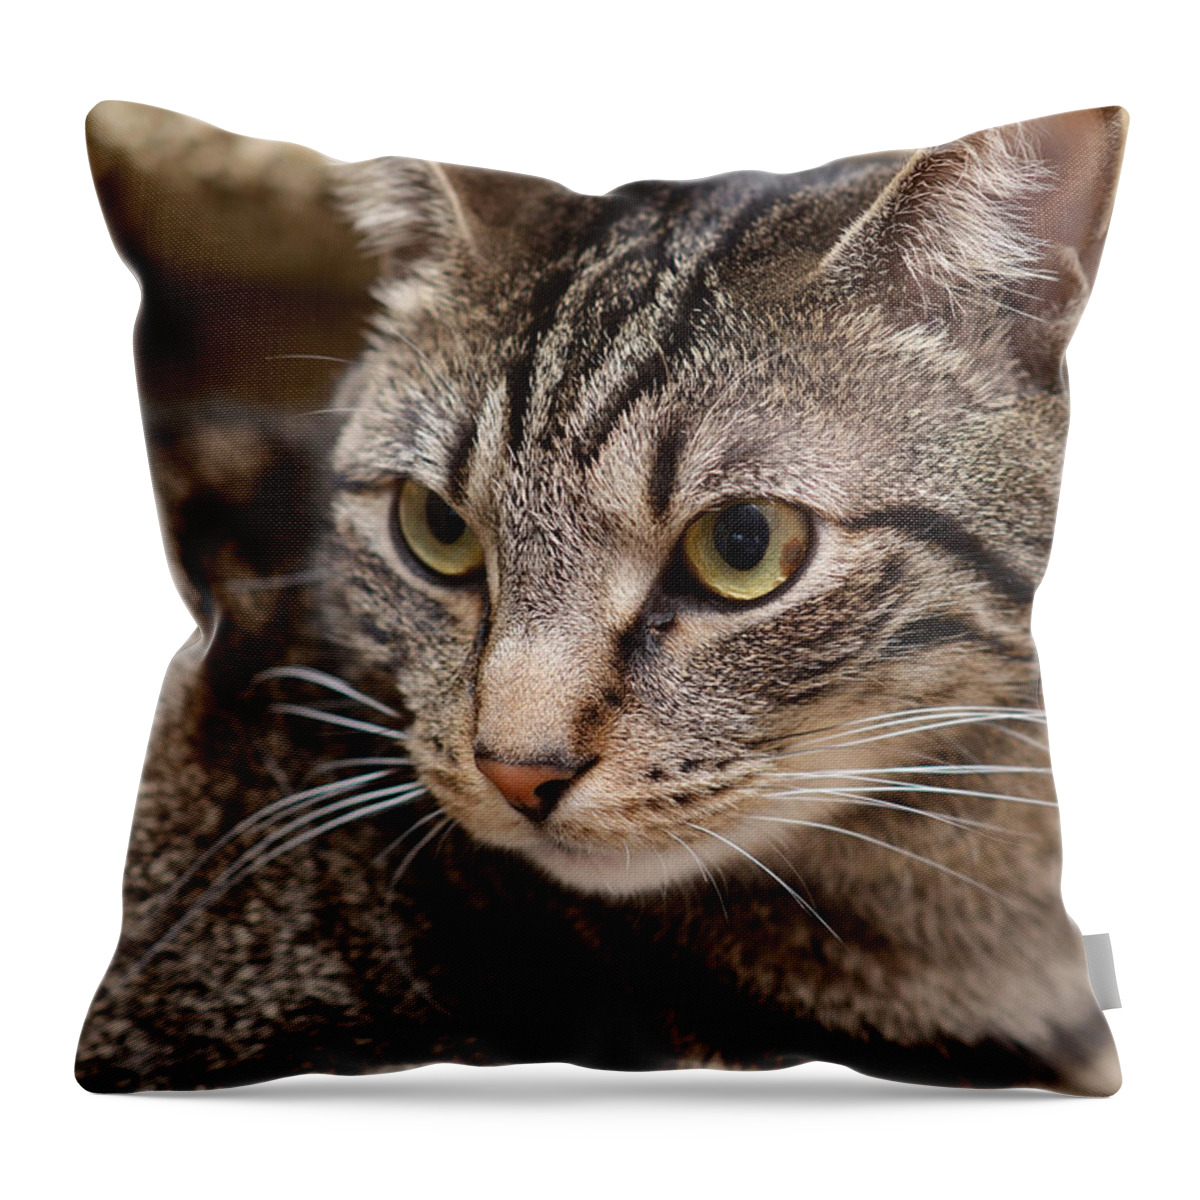 Cats Throw Pillow featuring the photograph Teddy by Lisa Phillips